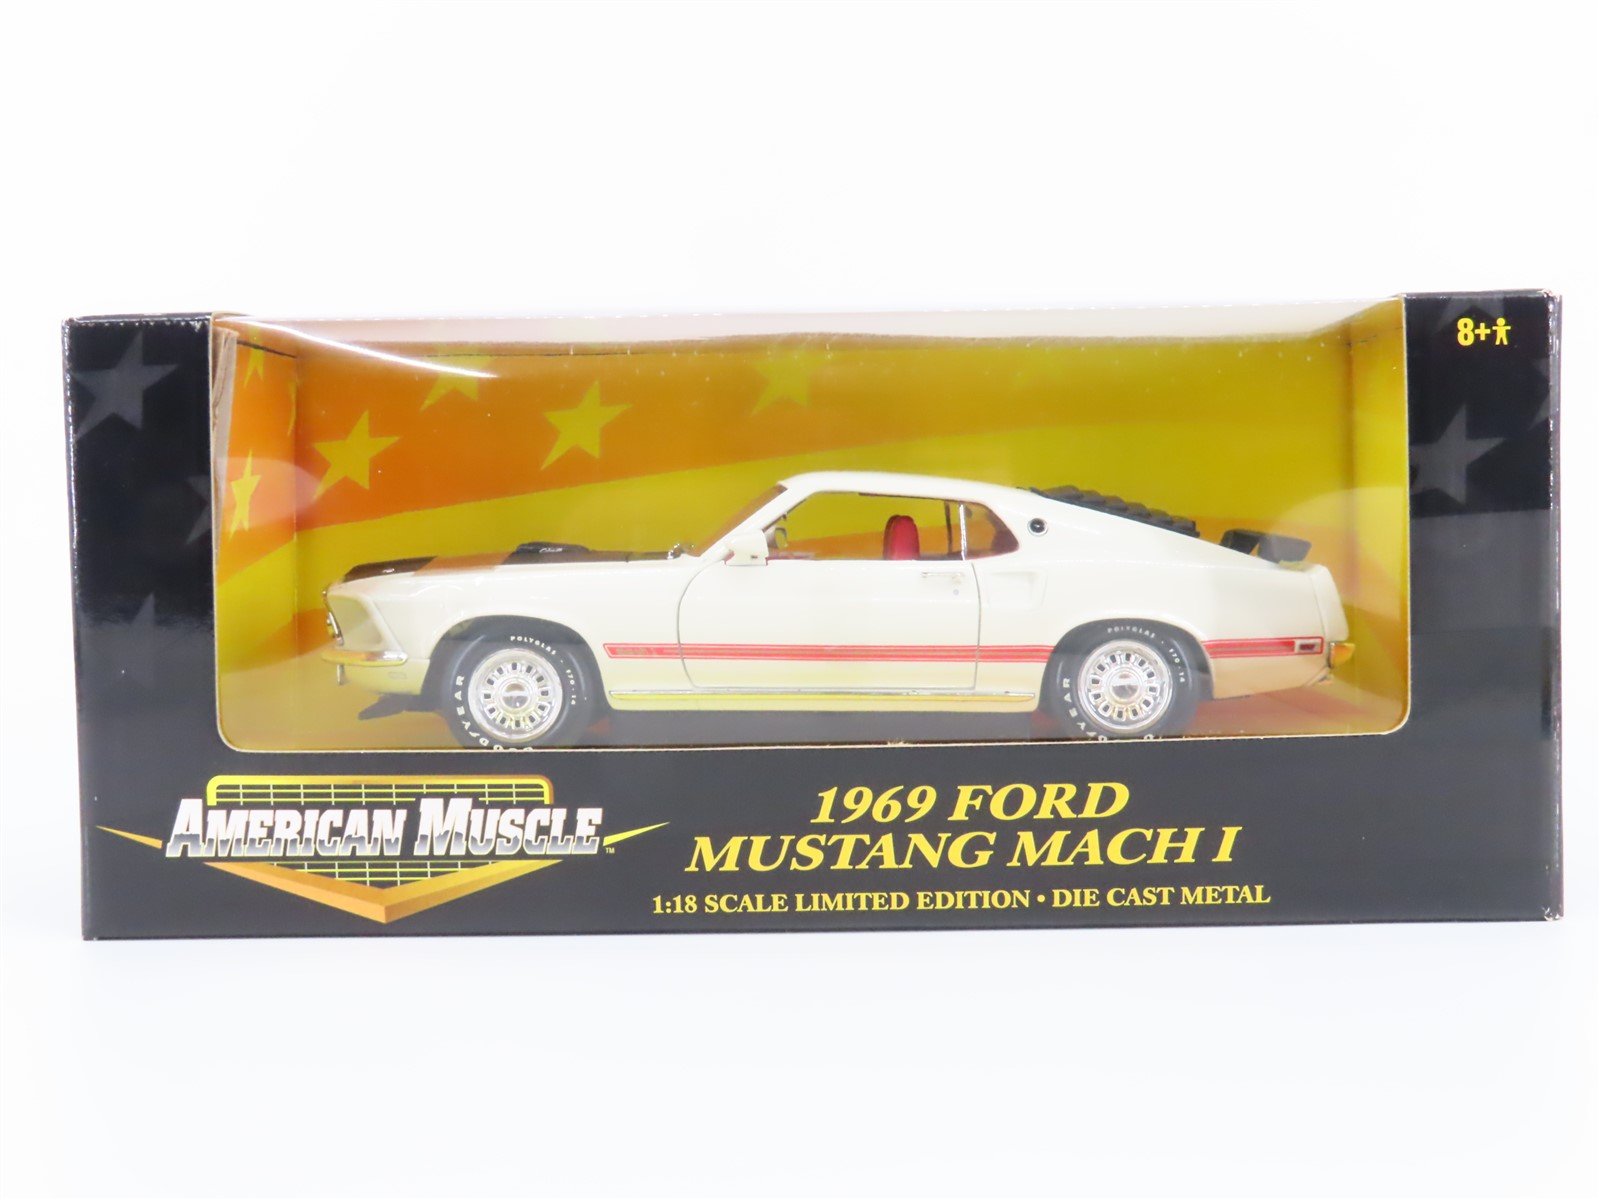 1:18 Scale Ertl American Muscle #32269 Die-Cast 1969 Ford Mustang Mach I